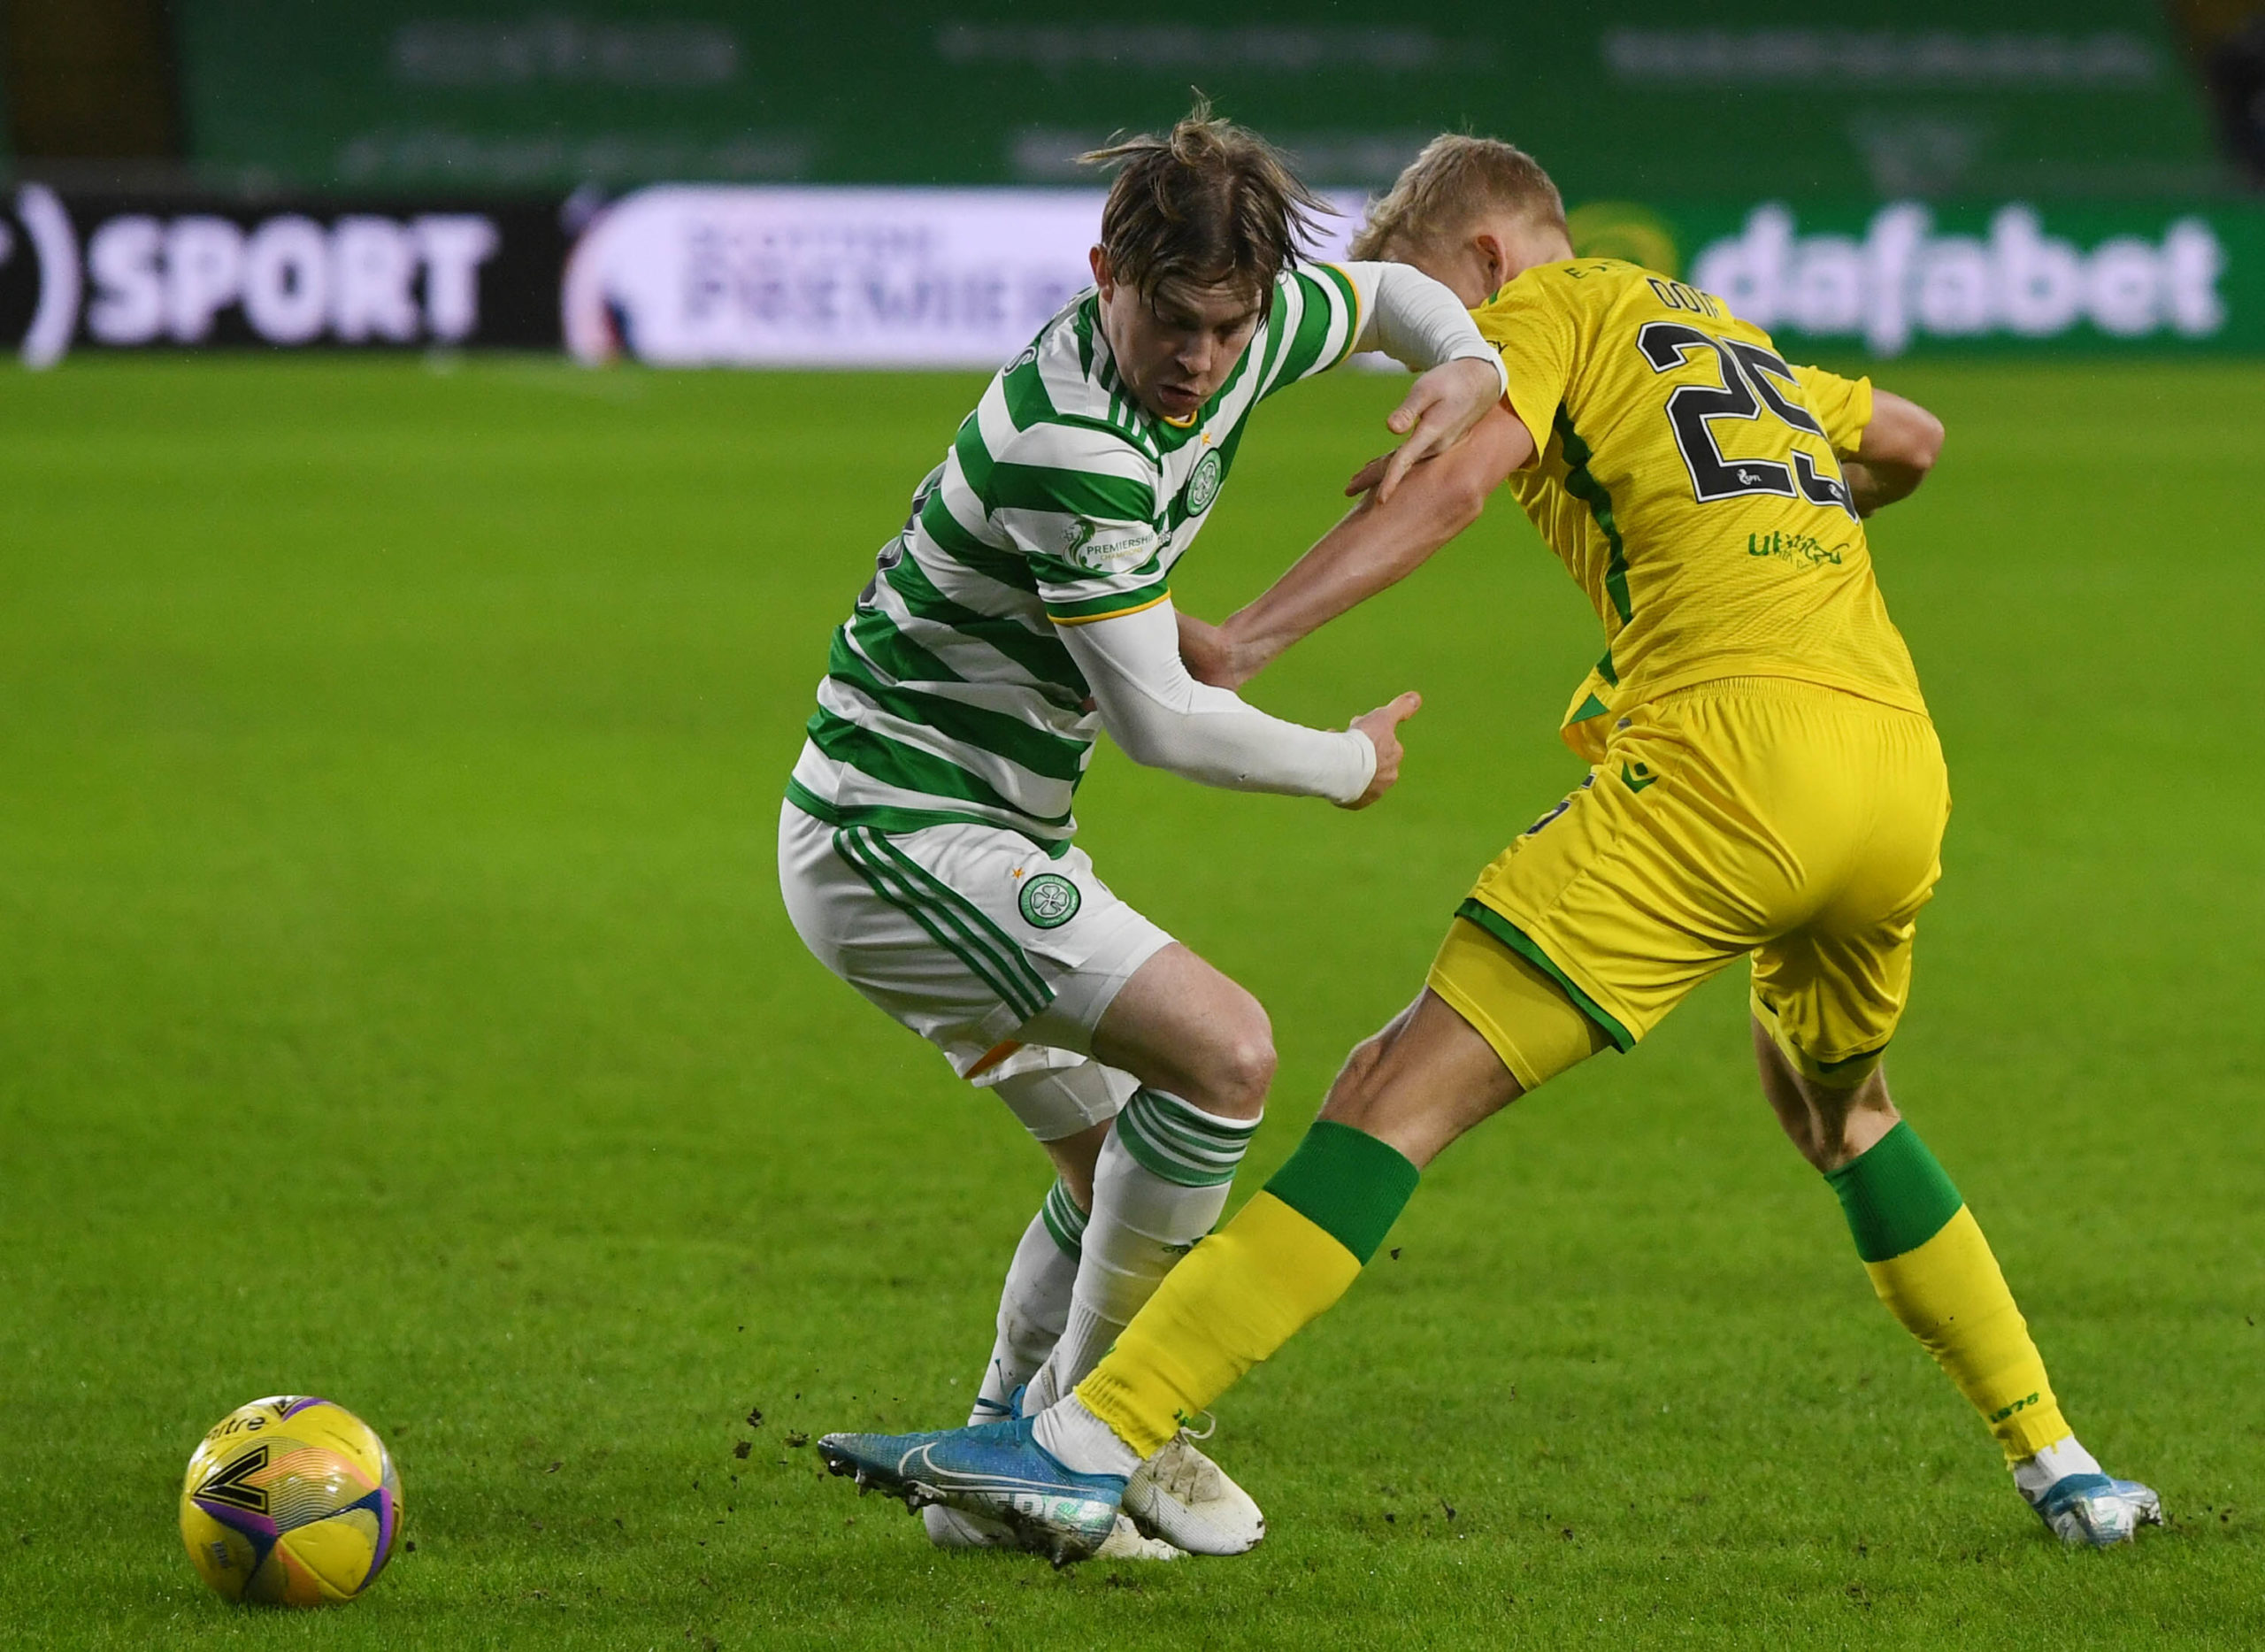 Cameron Harper situation adds wrinkle to difficult day for Celtic